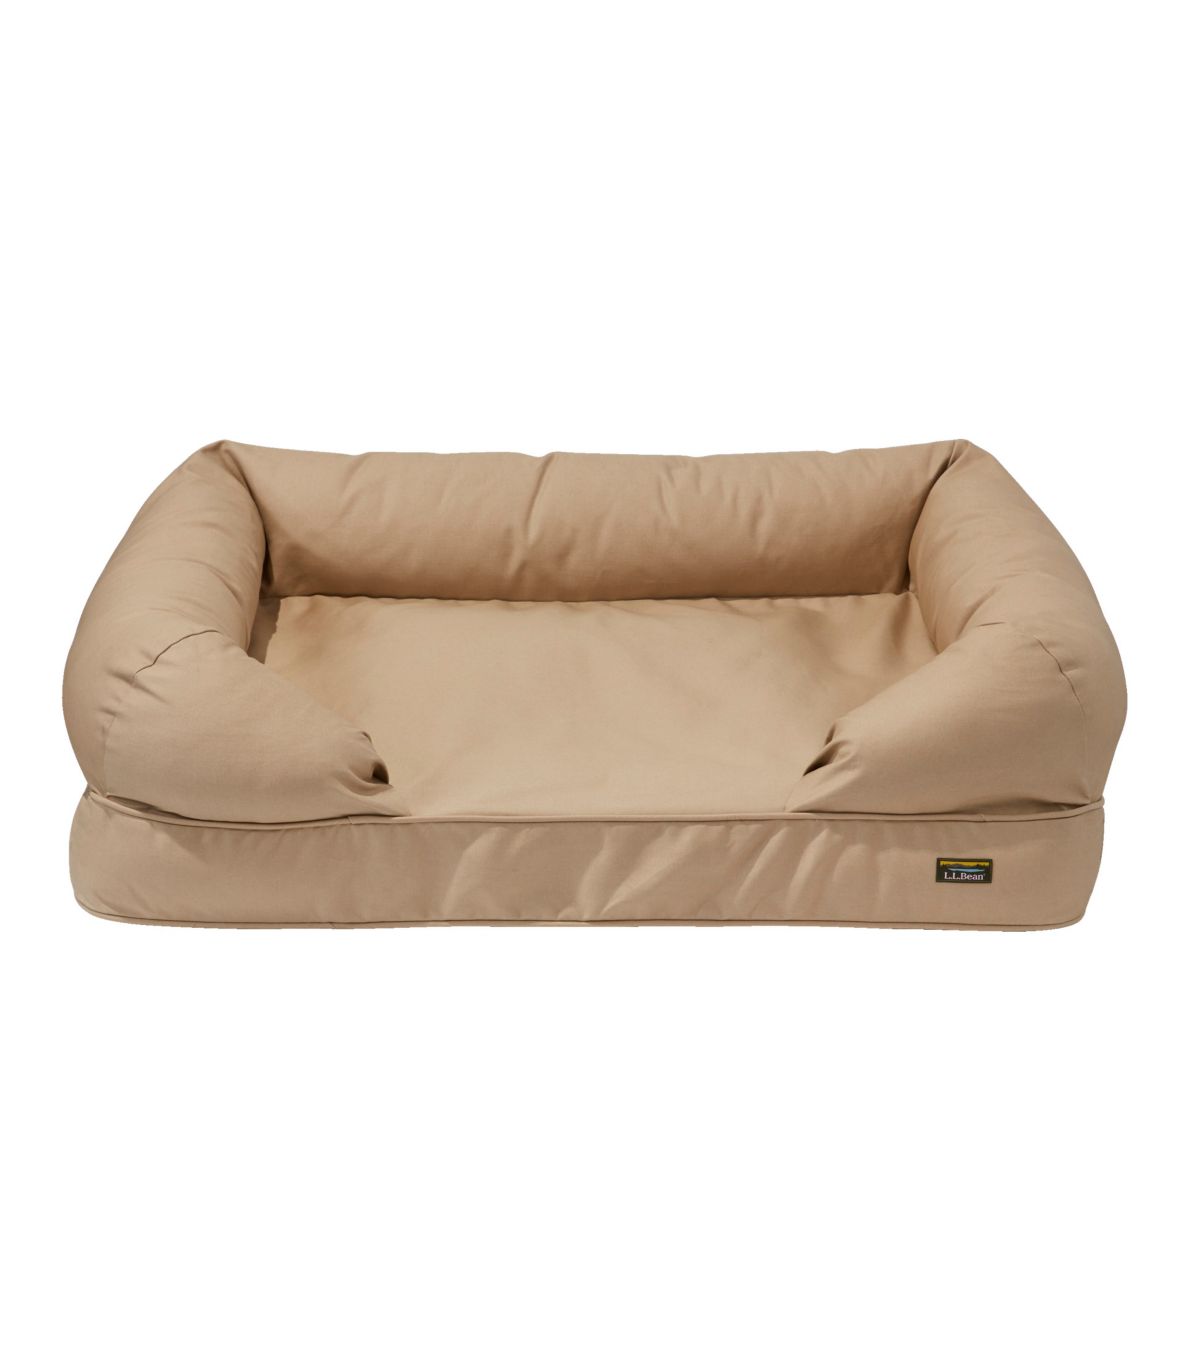 Premium Therapeutic Dog Bed Couch